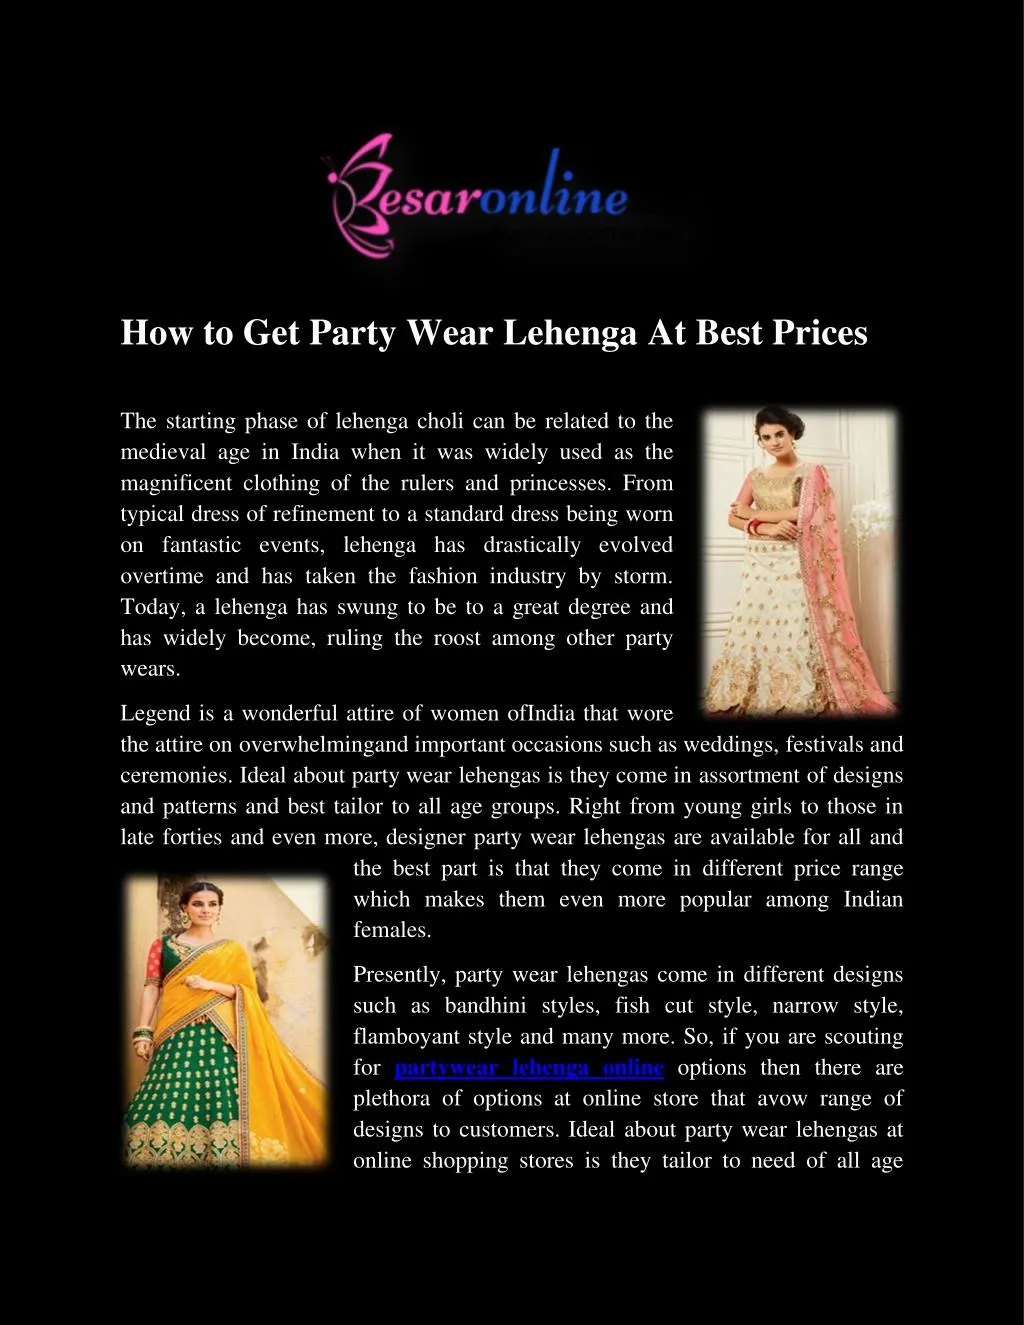 how to get party wear lehenga at best prices